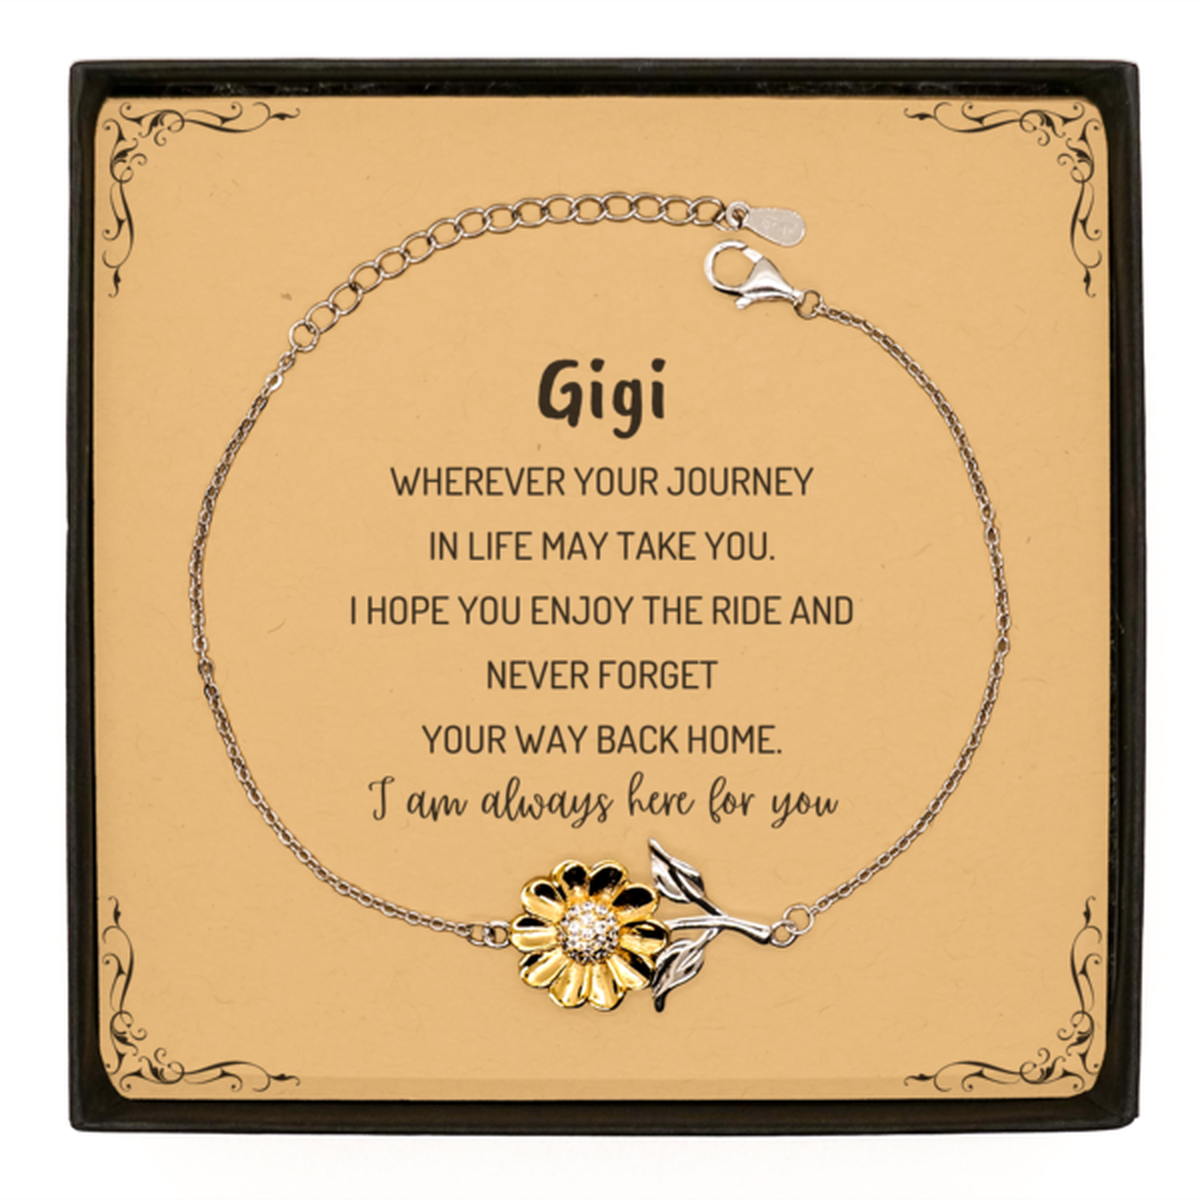 Gigi wherever your journey in life may take you, I am always here for you Gigi Sunflower Bracelet, Awesome Christmas Gifts For Gigi Message Card, Gigi Birthday Gifts for Men Women Family Loved One